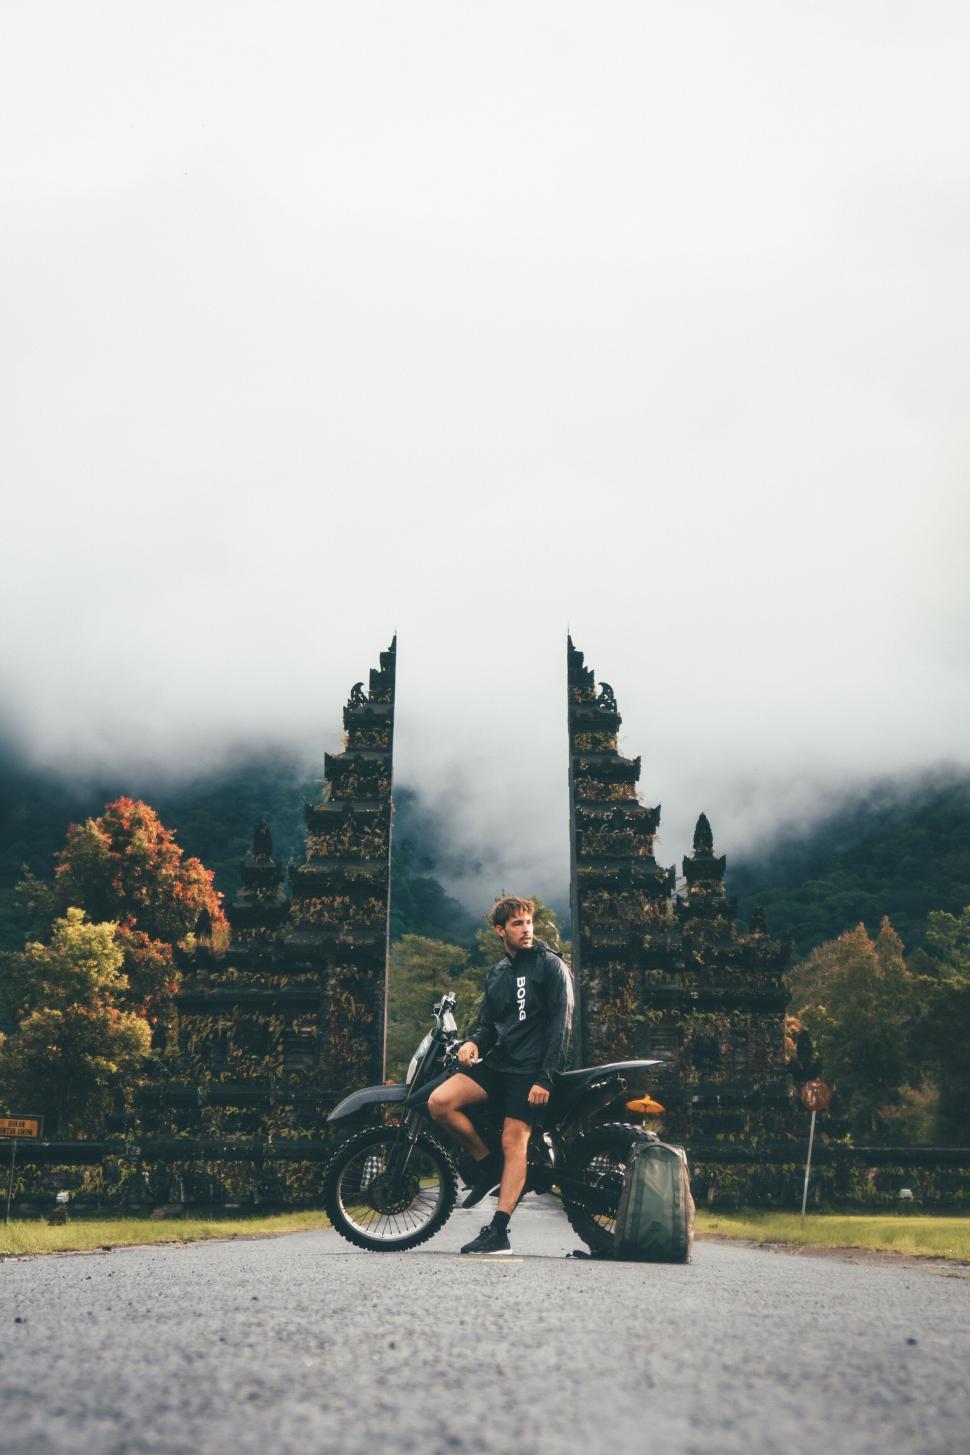 Free Image of Motorcyclist pausing on a misty mountain road 